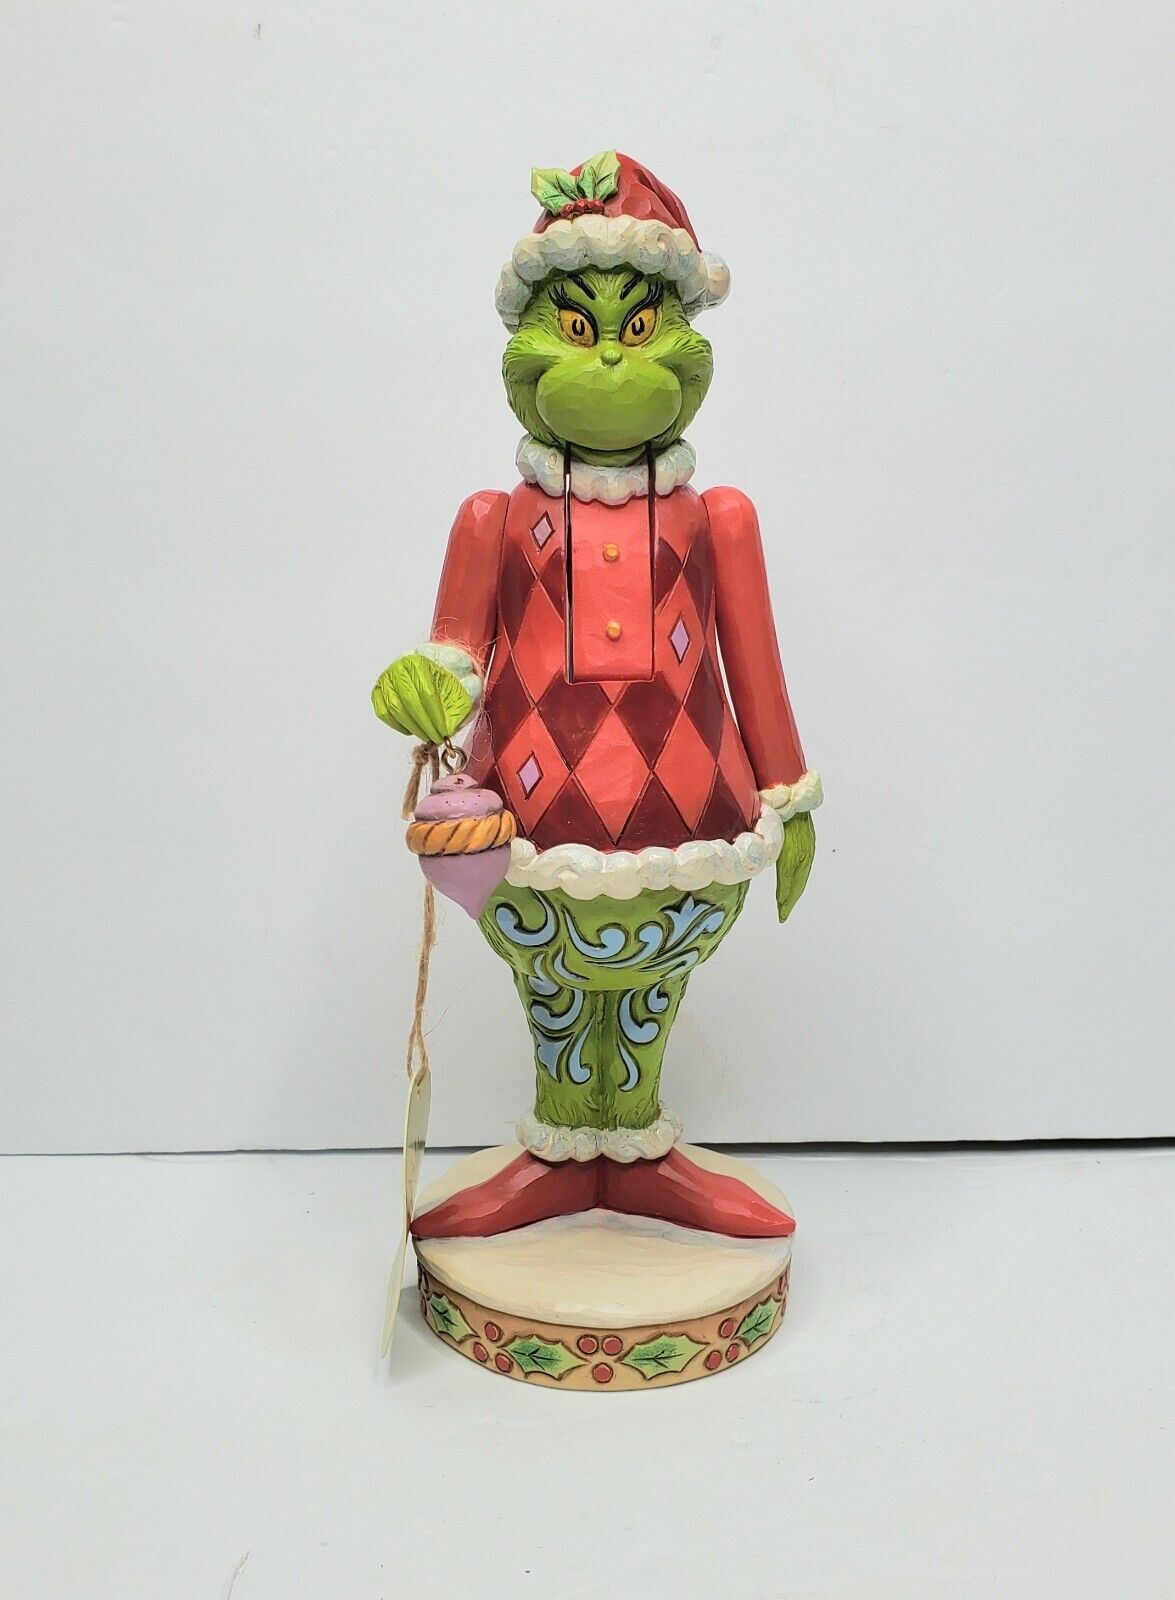 The Grinch by Jim Shore Figurine - Nutcracker Grinch by Jim Shore New